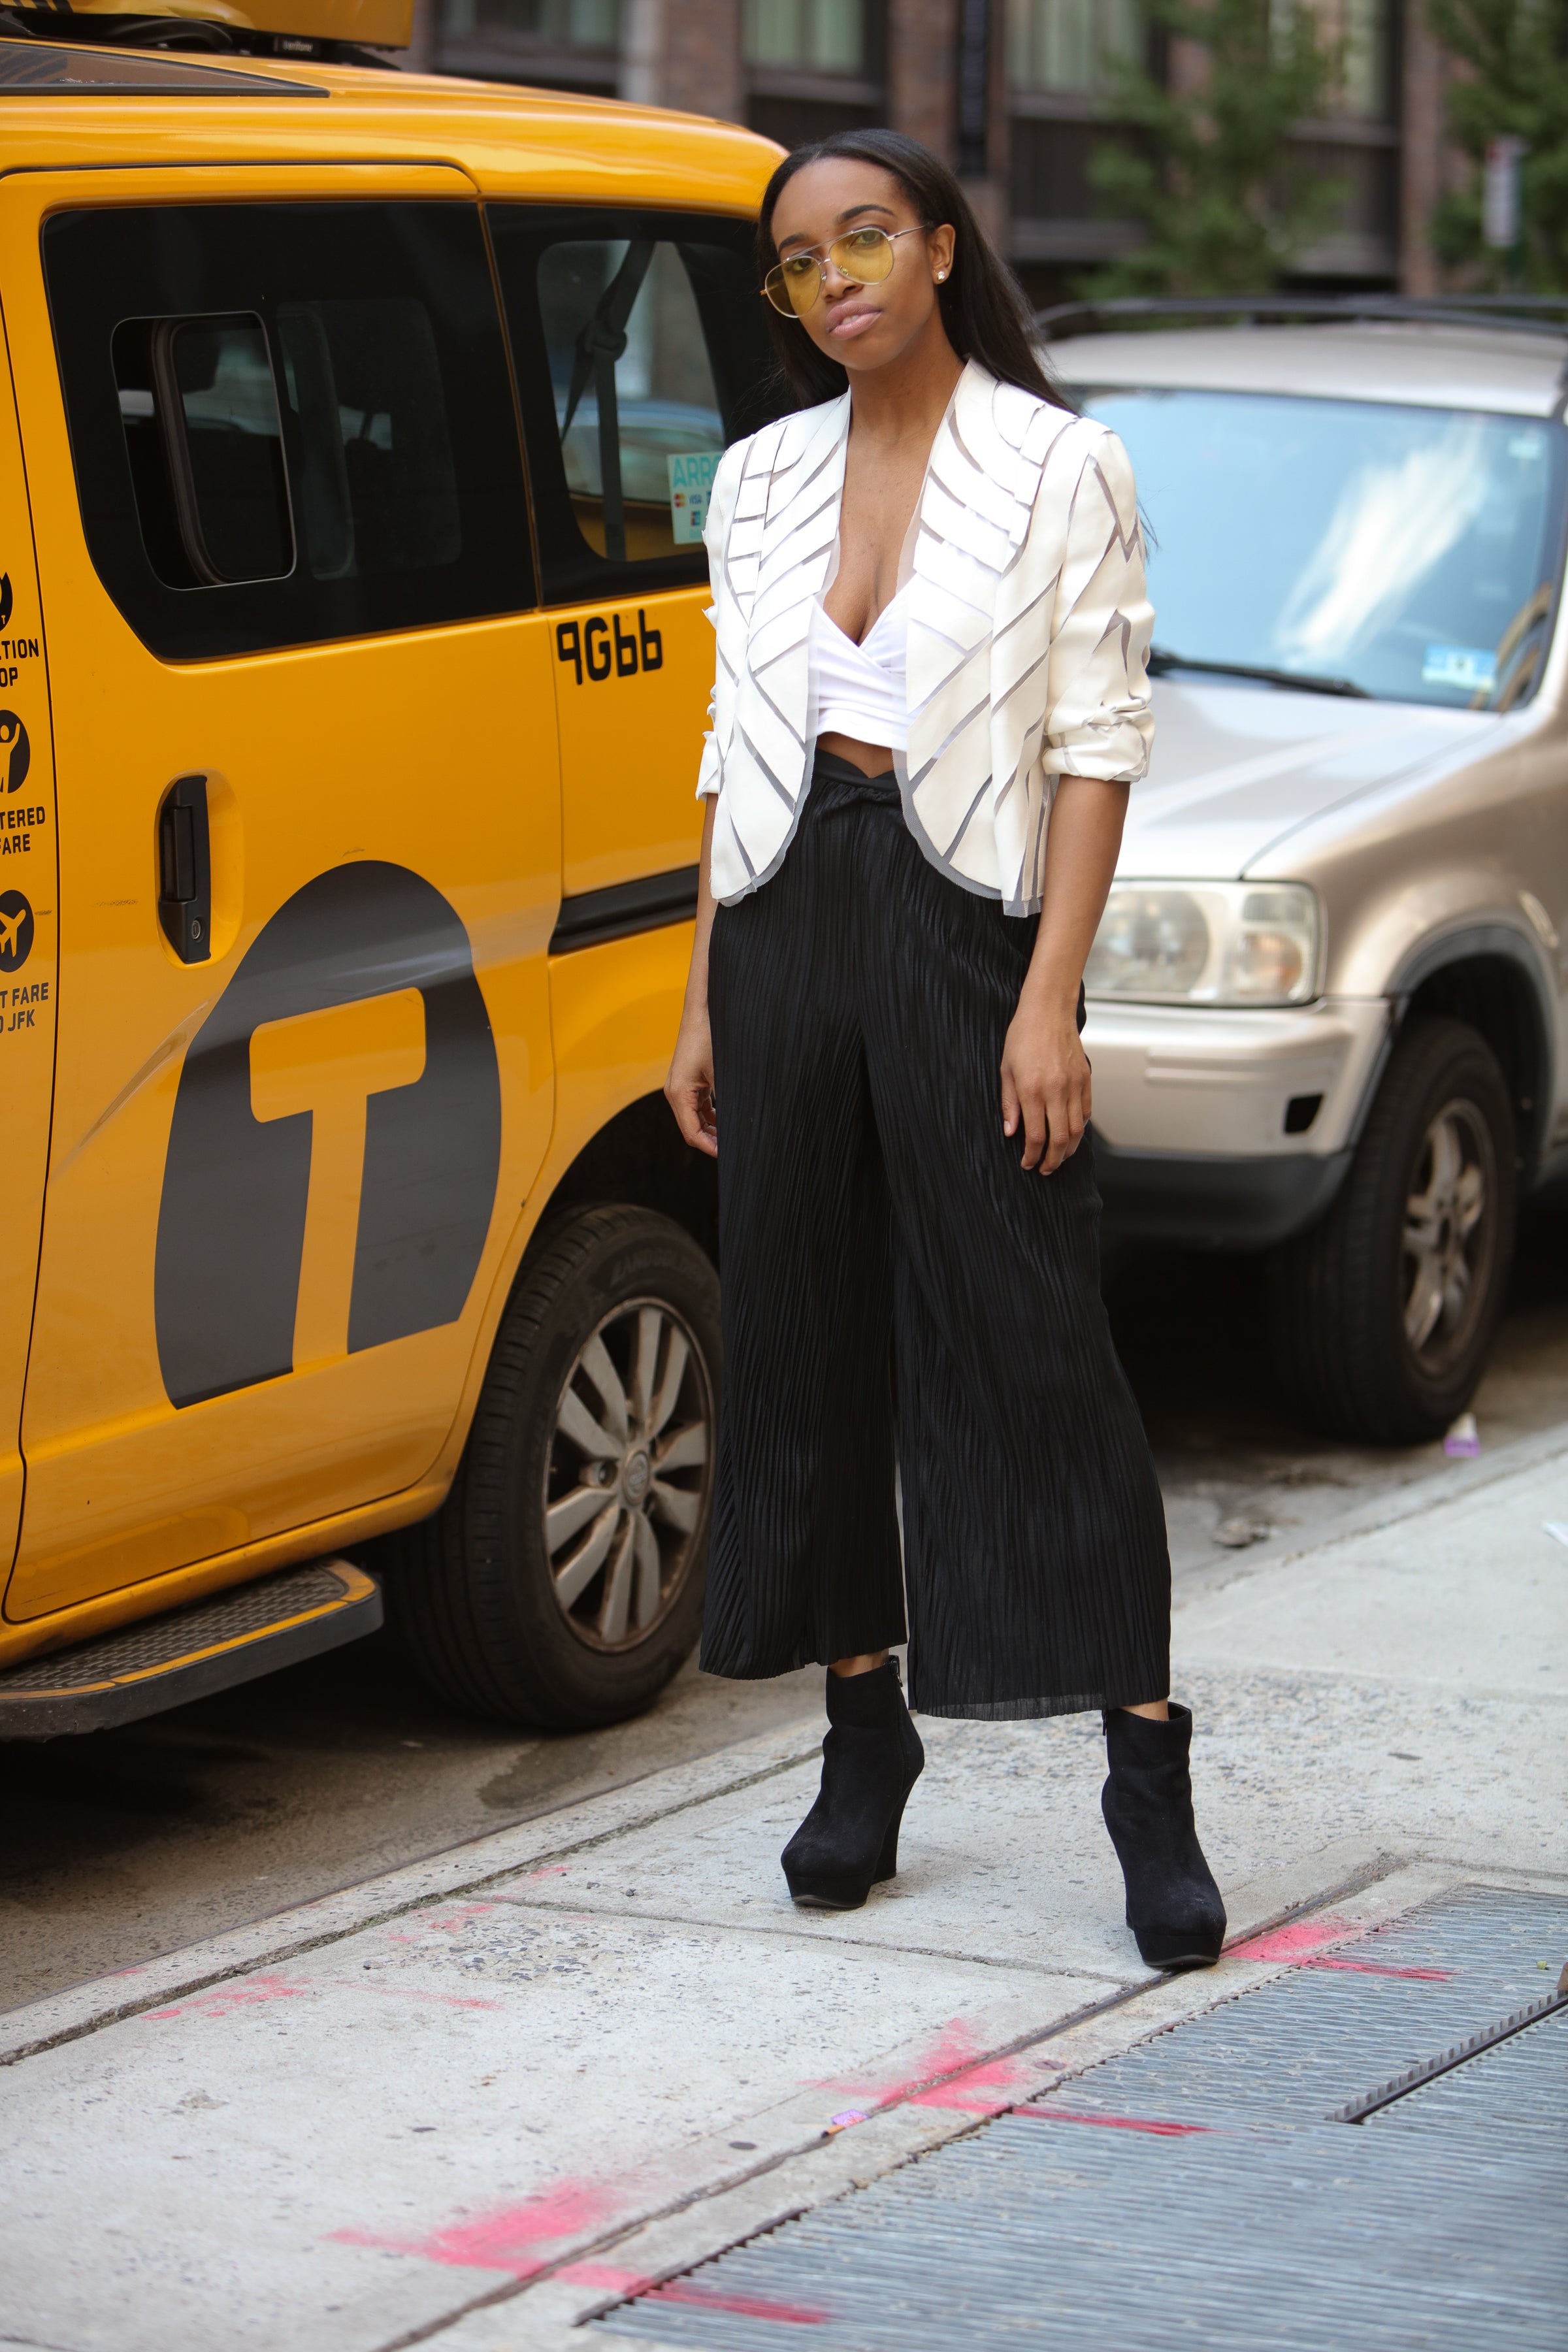 All The Glorious Street Style Looks From New York Fashion Week
